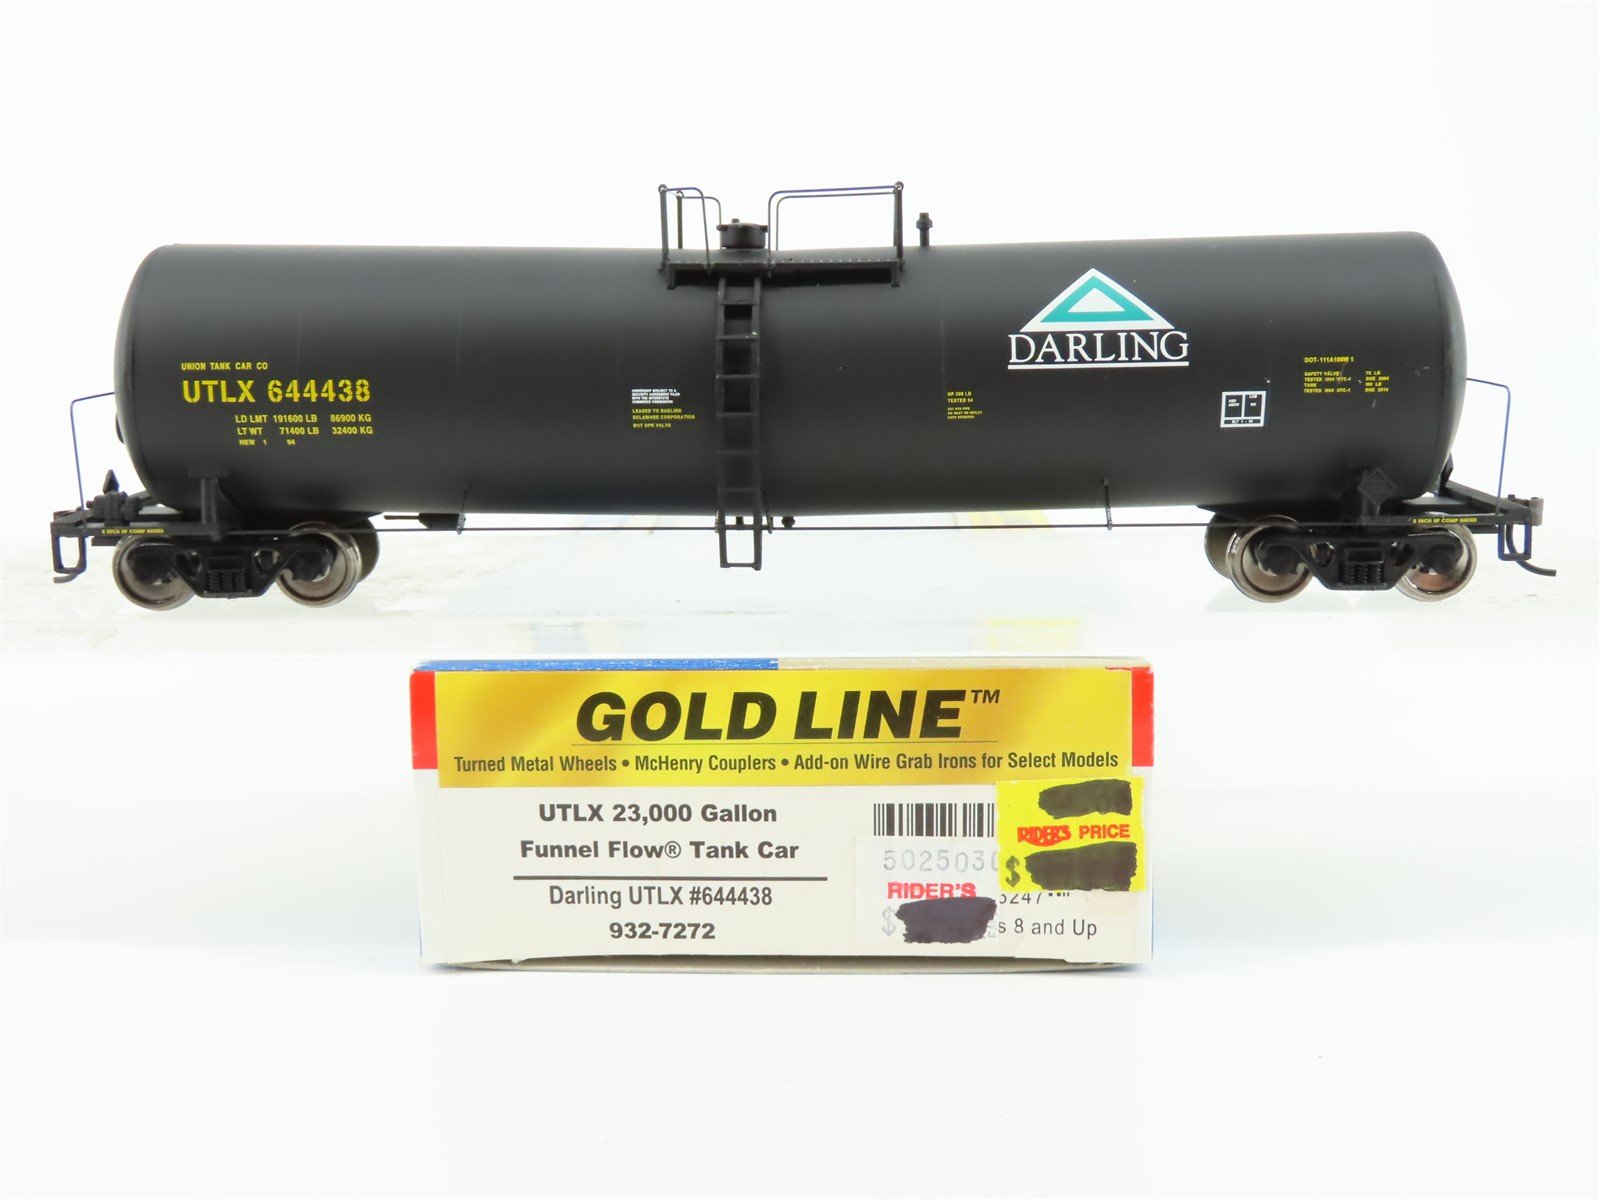 HO Scale Walthers Gold Line 932-7272 UTLX Darling Funnel Flow Tank Car #644438